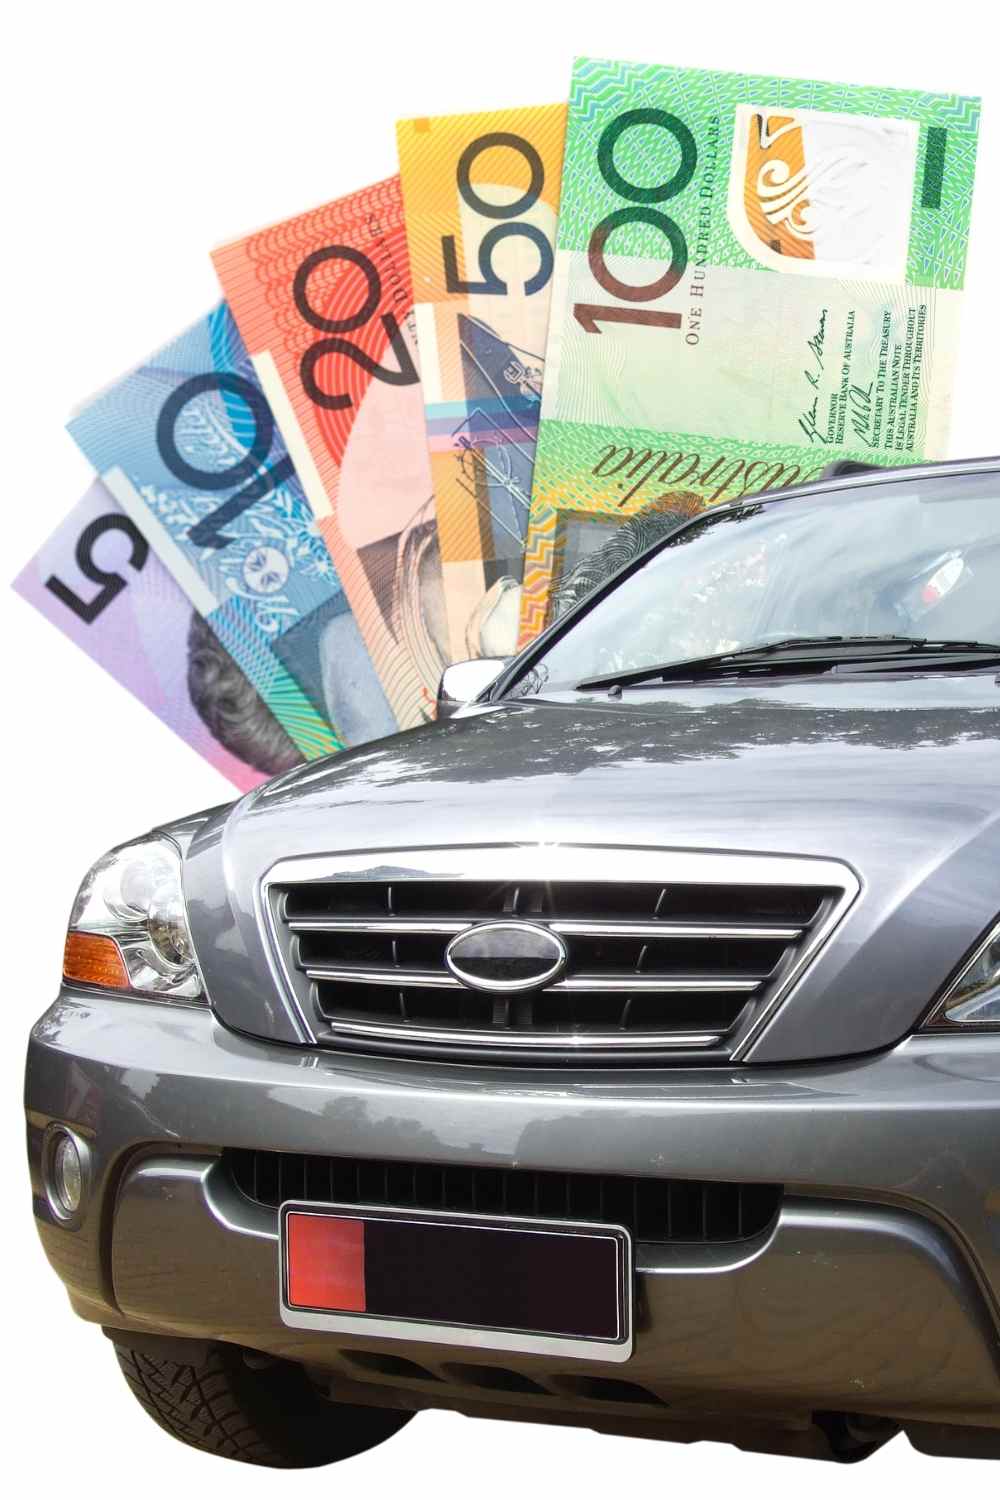 MELBOURNE’S BEST CASH FOR CARS COMPANY